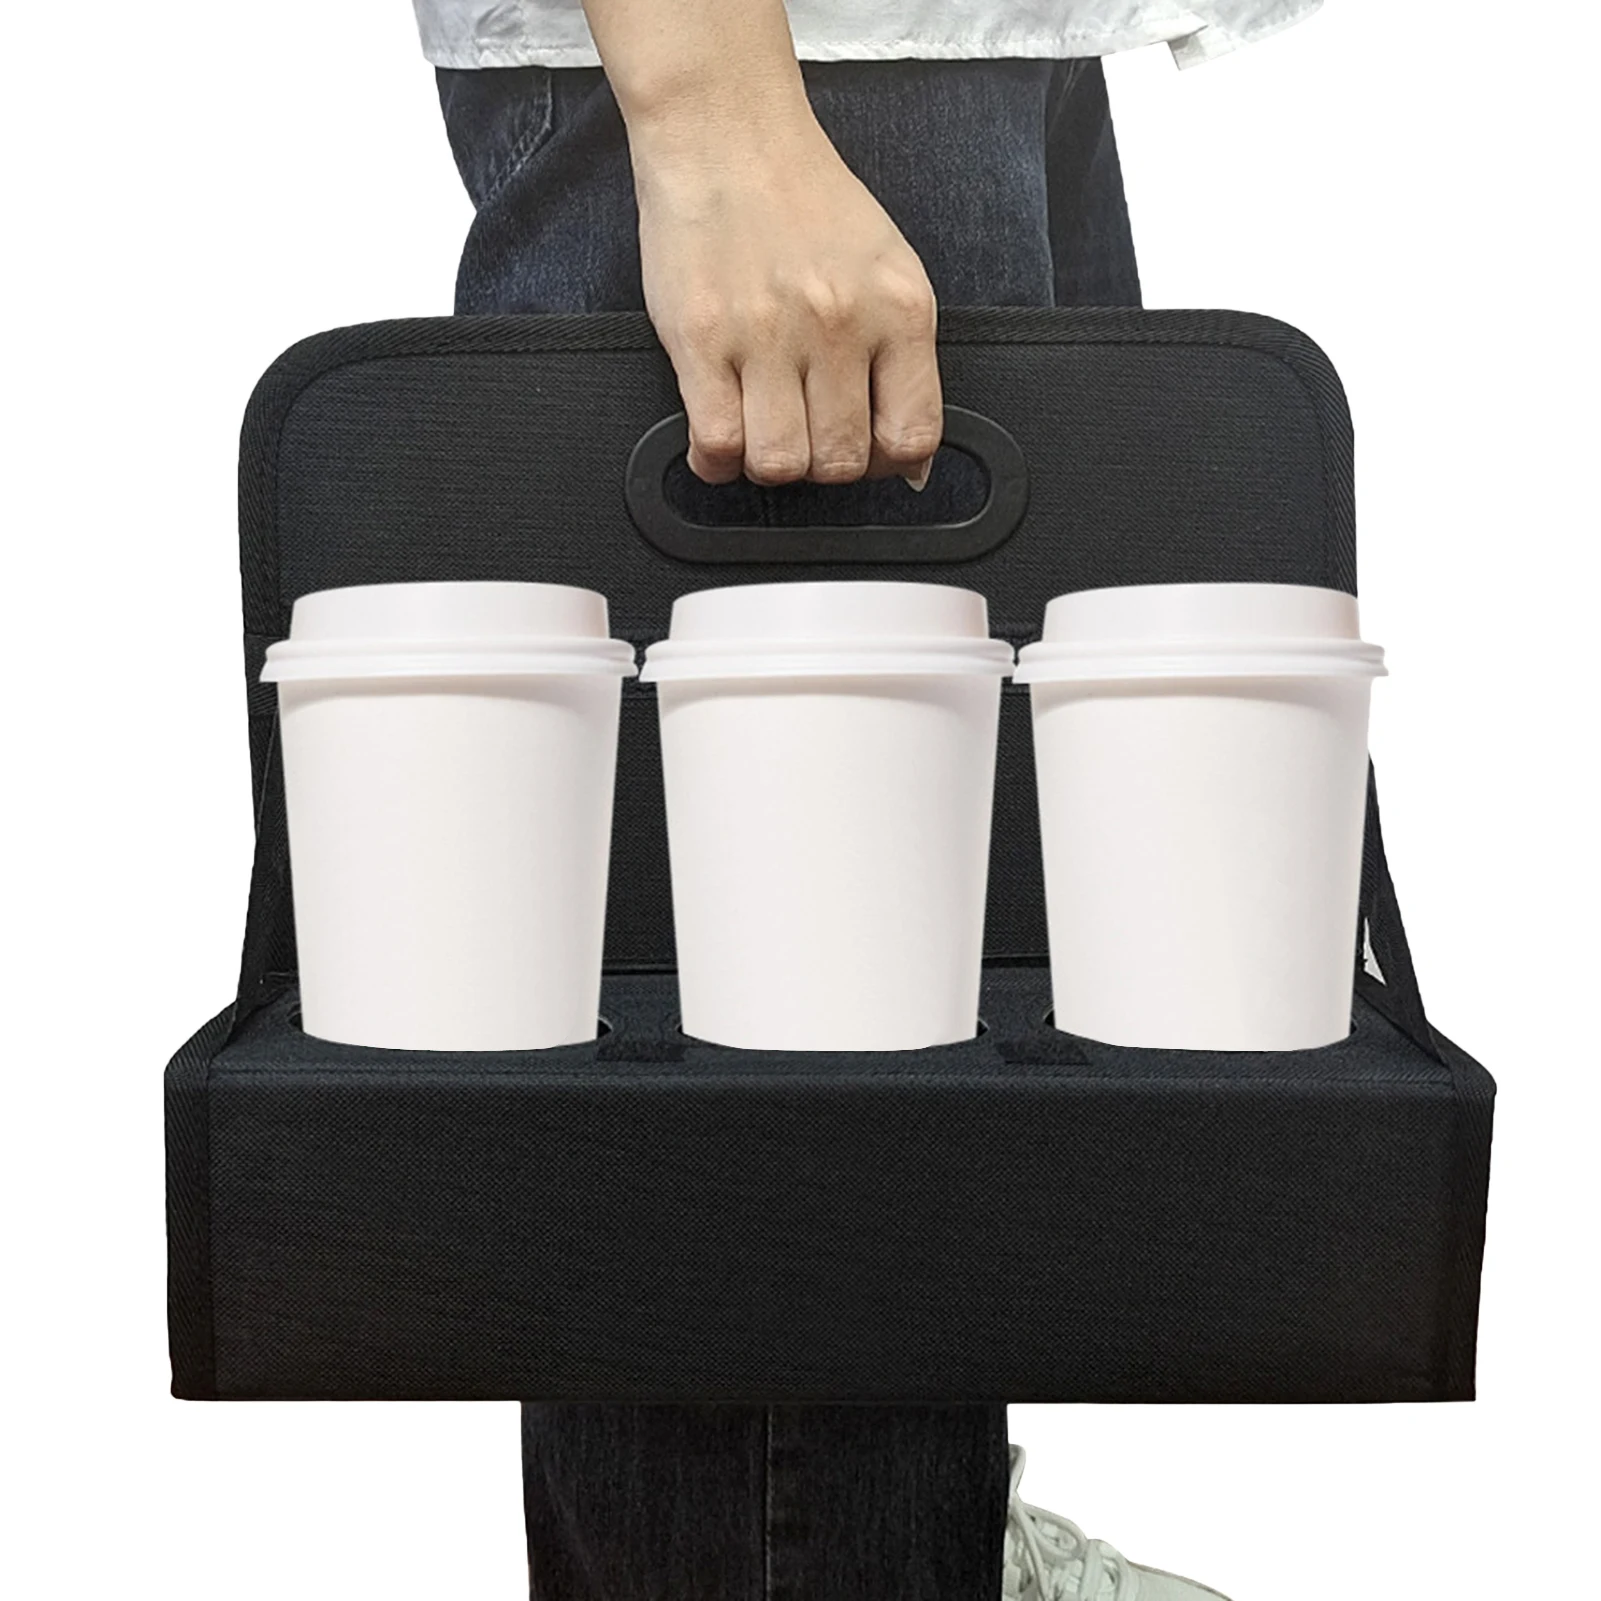 

Portable Drink Carrier Portable Delivery Bag With Handle Safely Secures Hot And Cold Beverages Drink Holder For Food Delivery